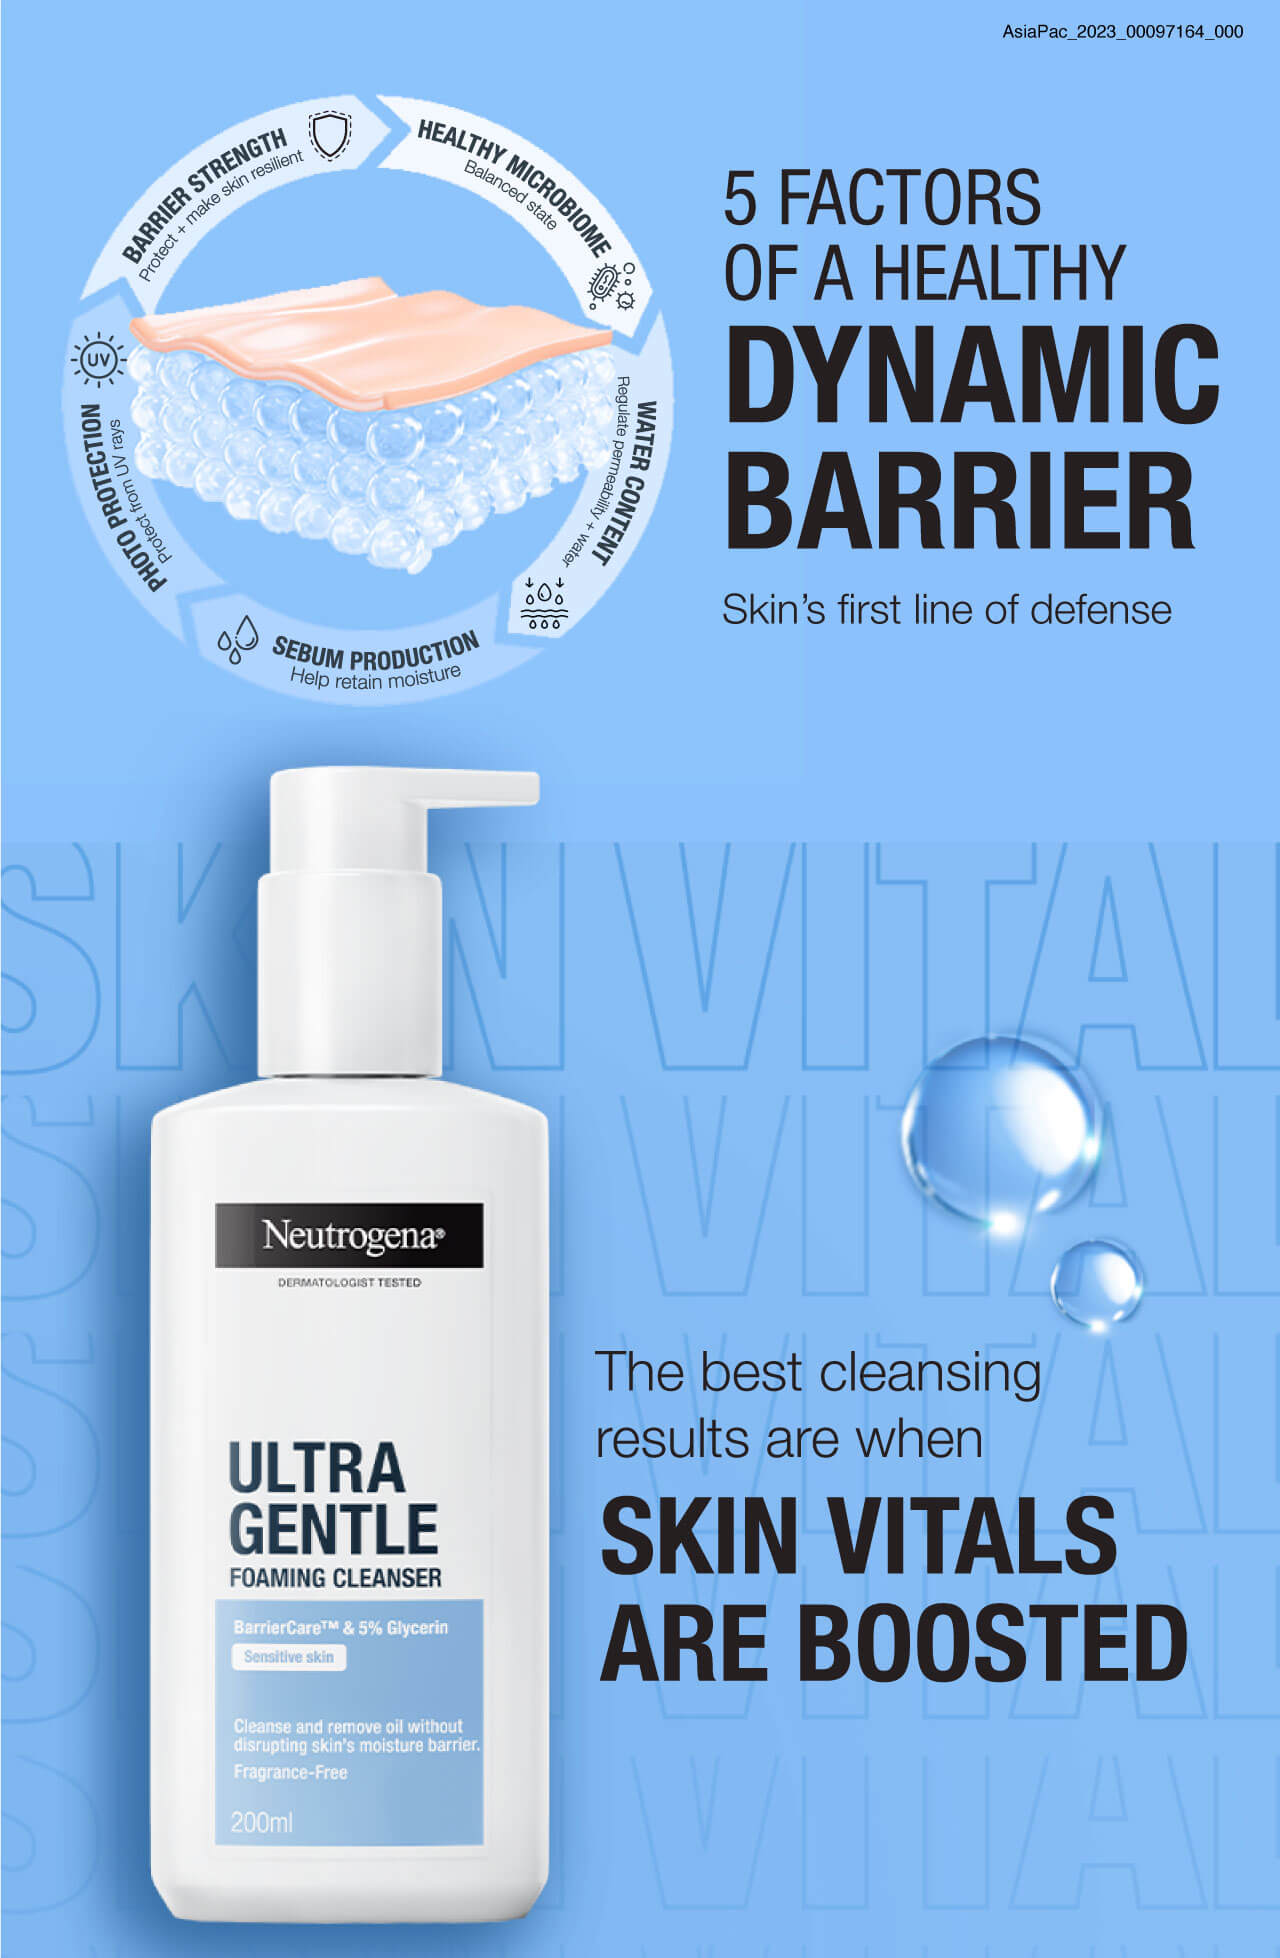 5 FACTORS OF A HEALTHY  DYNAMIC BARRIER Skin’s first line of defense  BARRIER STRENGTH Protect + make skin resilient  HEALTHY MICROBIOME Balanced state WATER CONTENT Regulate permeability + water SEBUM PRODUCTION Help retain moisture  PHOTO PROTECTION Pro